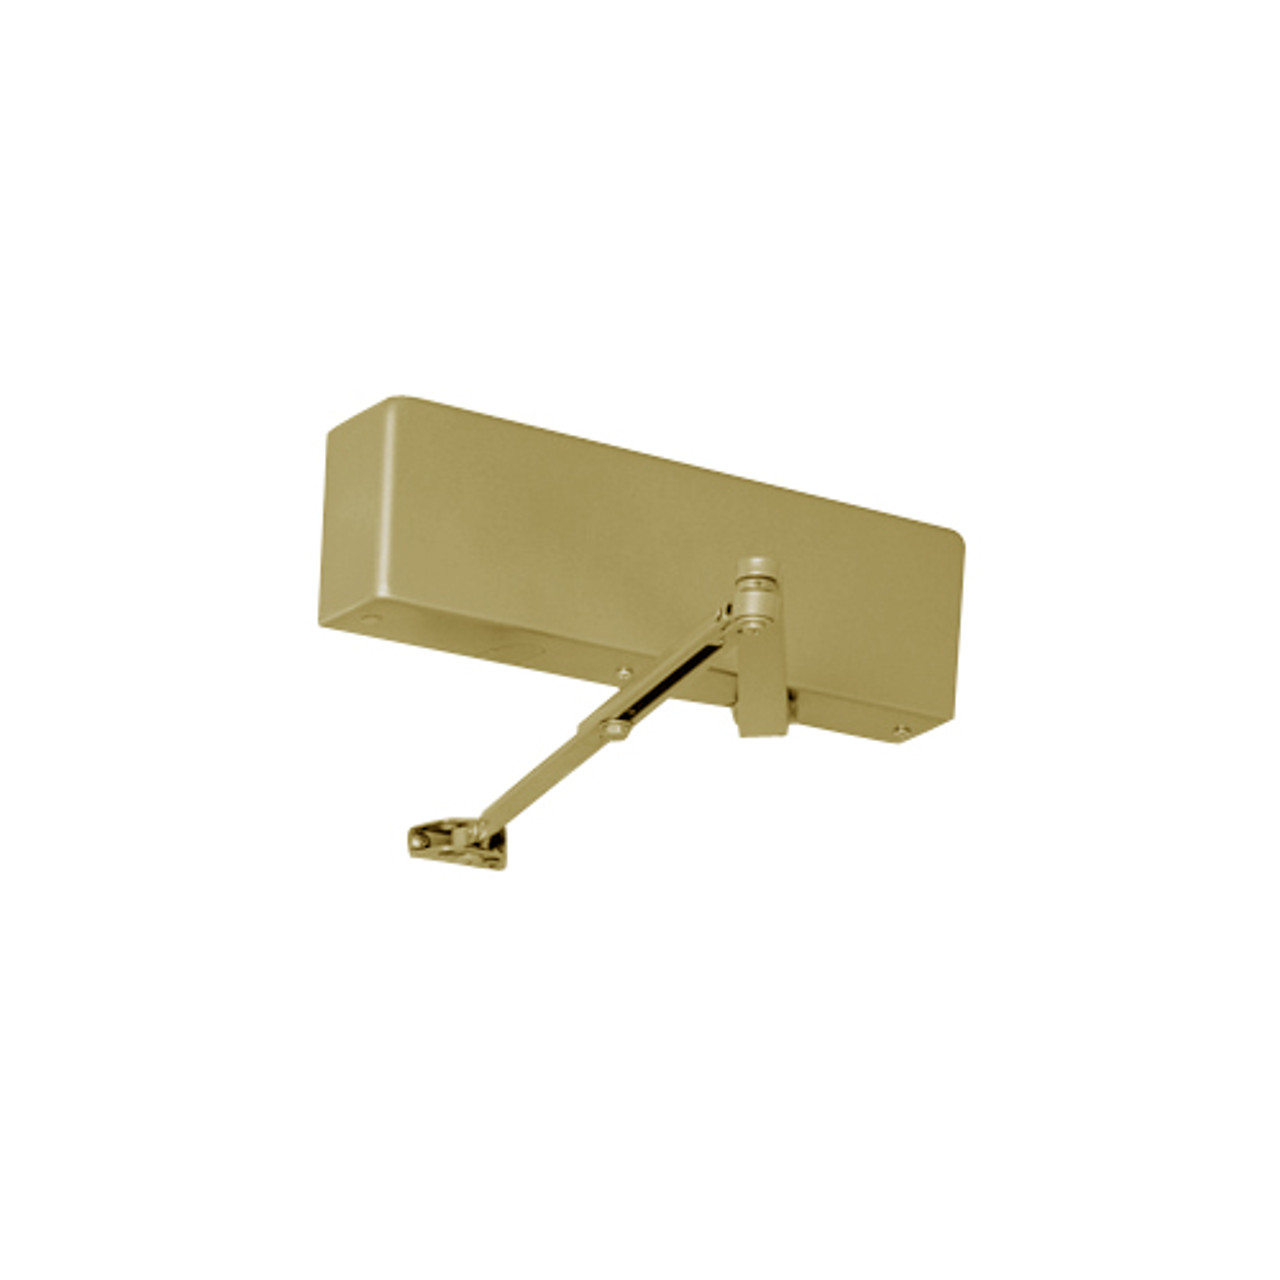 J7500H-696 Norton 7500 Series Hold Open Institutional Door Closer with Top Jamb Only Reveals 2-3/4 to 6-3/4 inch to 150 Degree in Gold Finish